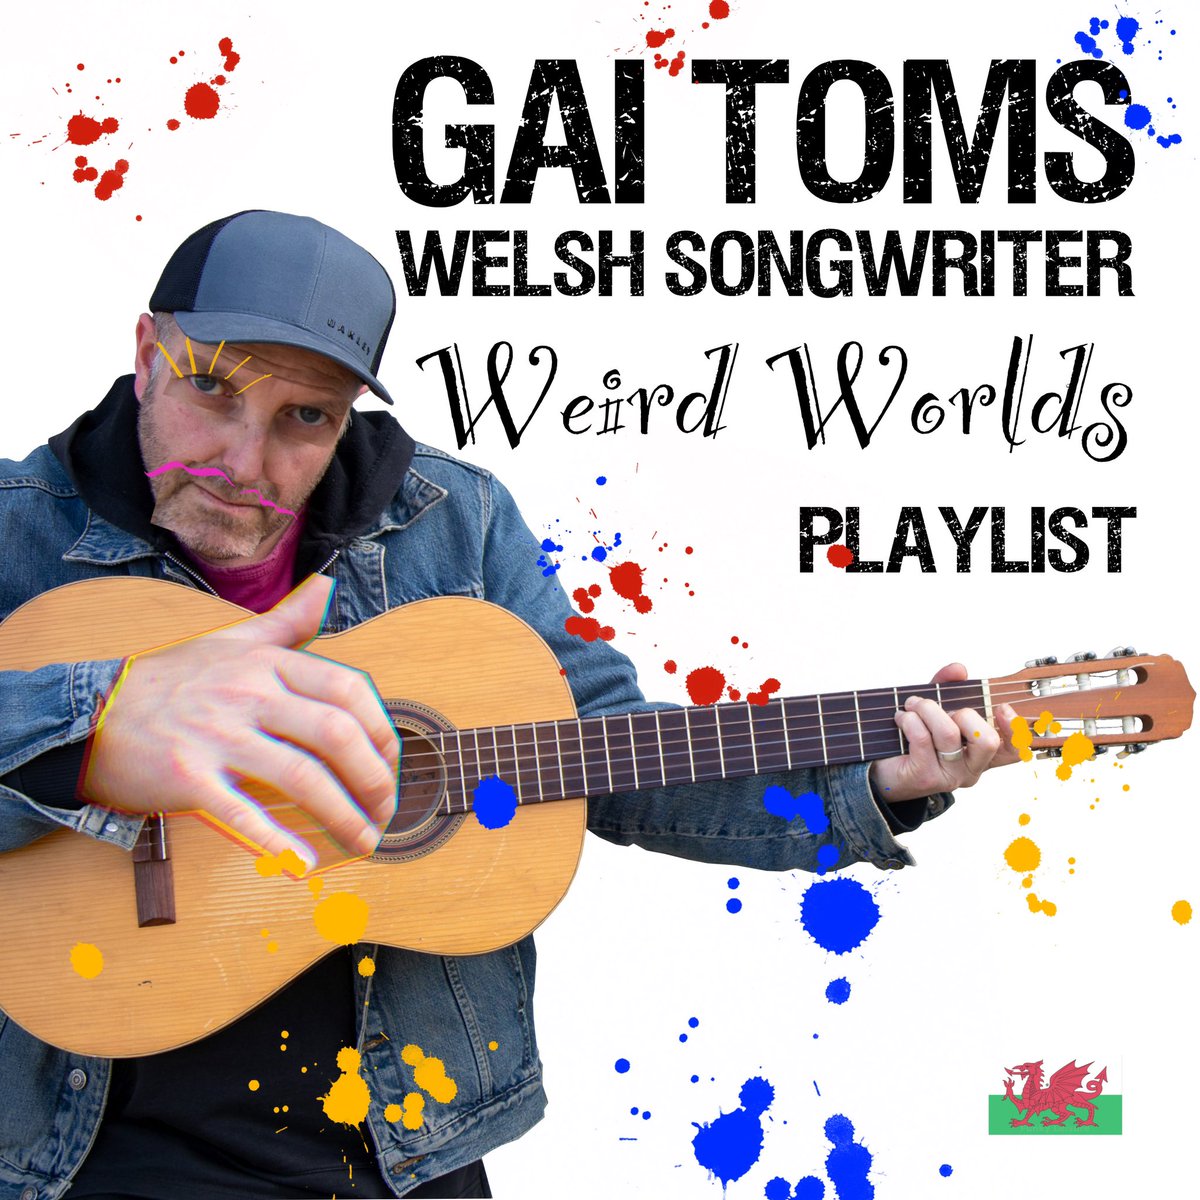 An attempt to allign some of my music in terms of styles/genres/moods. Yes, I’ve always been a tricky one to pin down. Hope this helps. Please follow / listen /share / enjoy! #welsh #songwriter #cymraeg open.spotify.com/artist/2atGKoS…